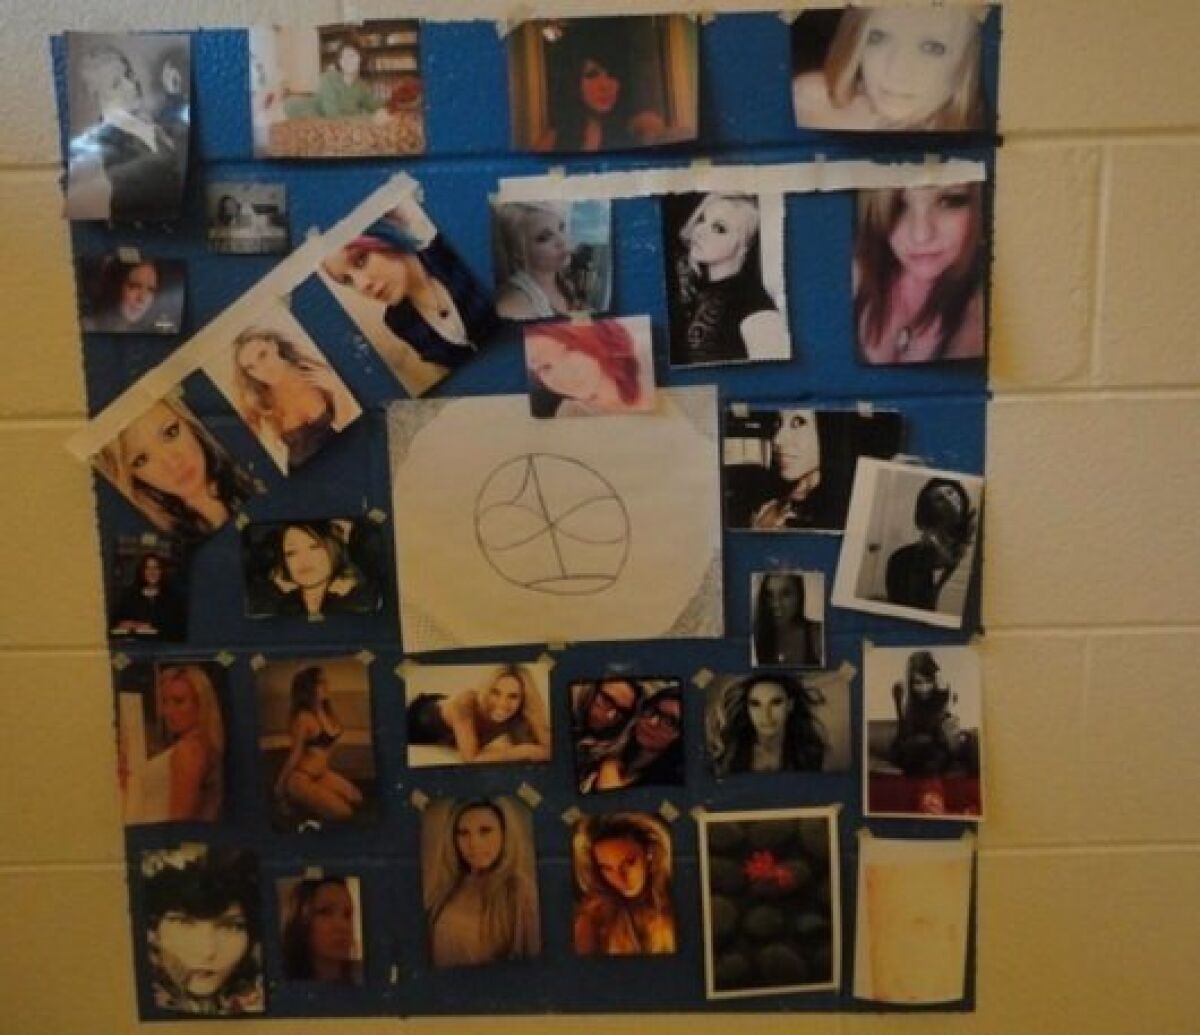 James Holmes posted photos from his fans on the wall of his jail cell.